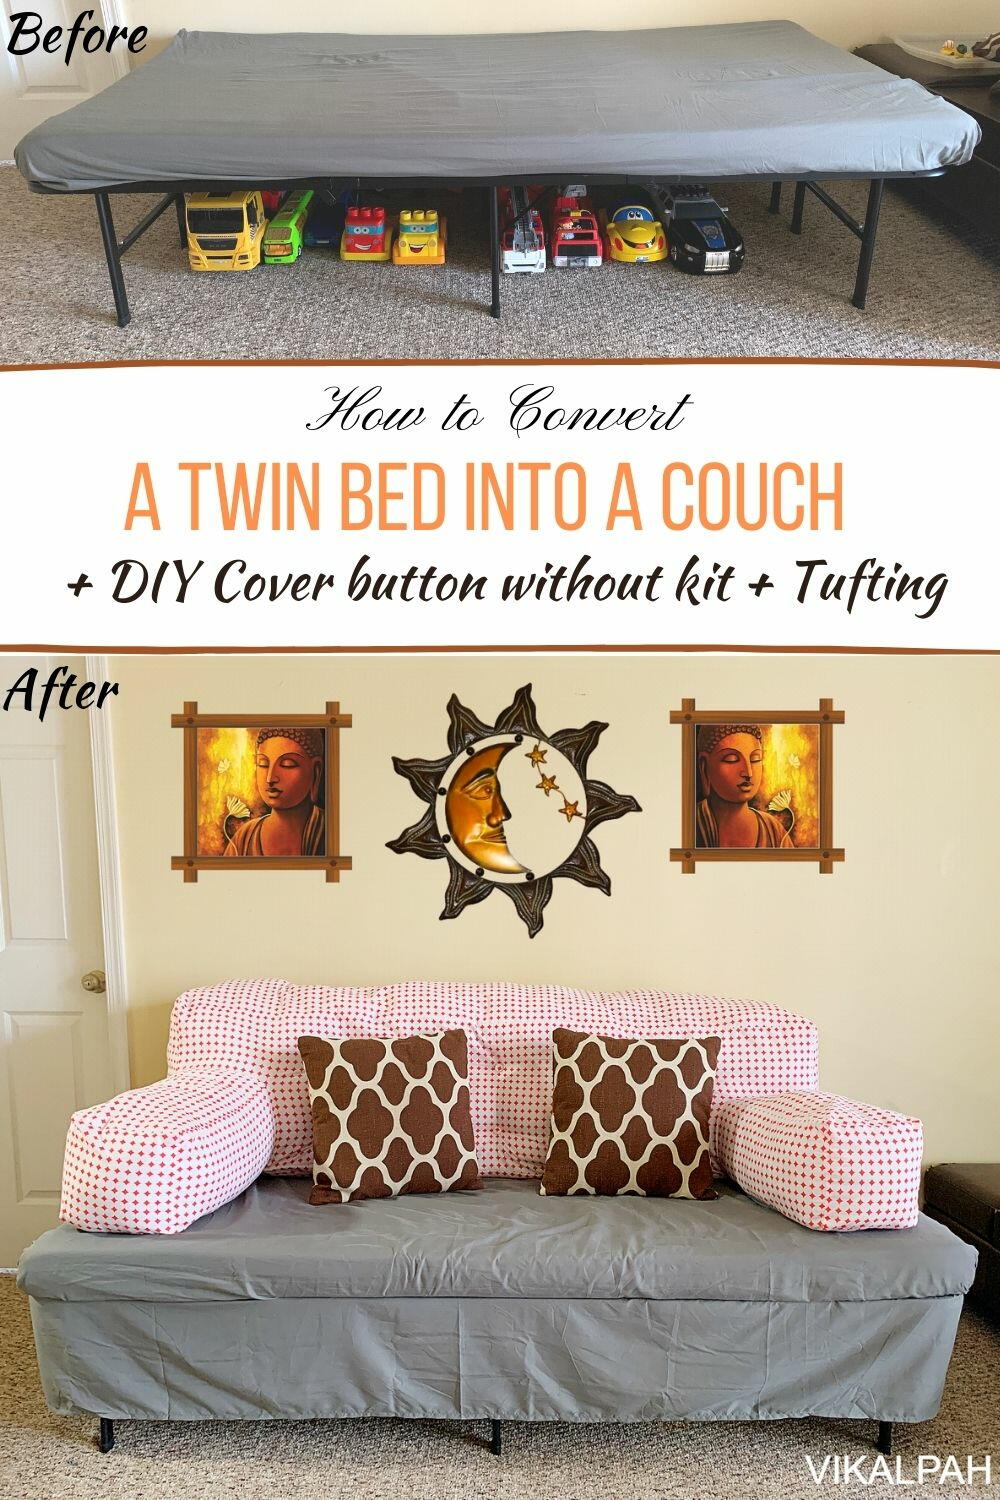 How To Convert A Twin Bed Into Couch, How To Make A Twin Bed Look Like A Couch